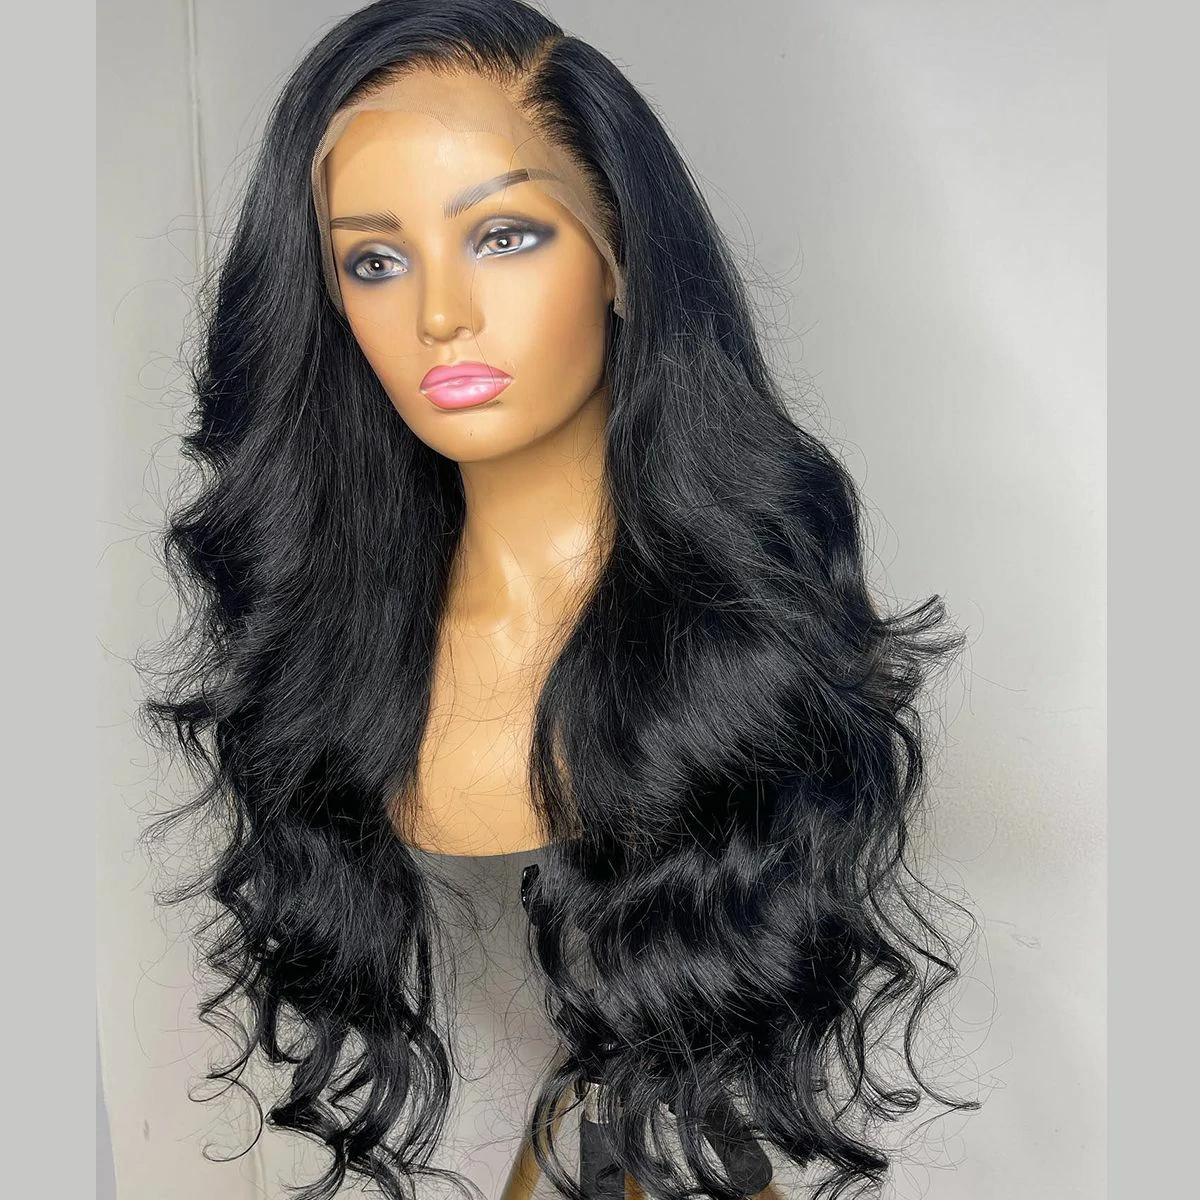  Hoyrhra 13x6 Body Wave Lace Front Wigs Human Hair Pre